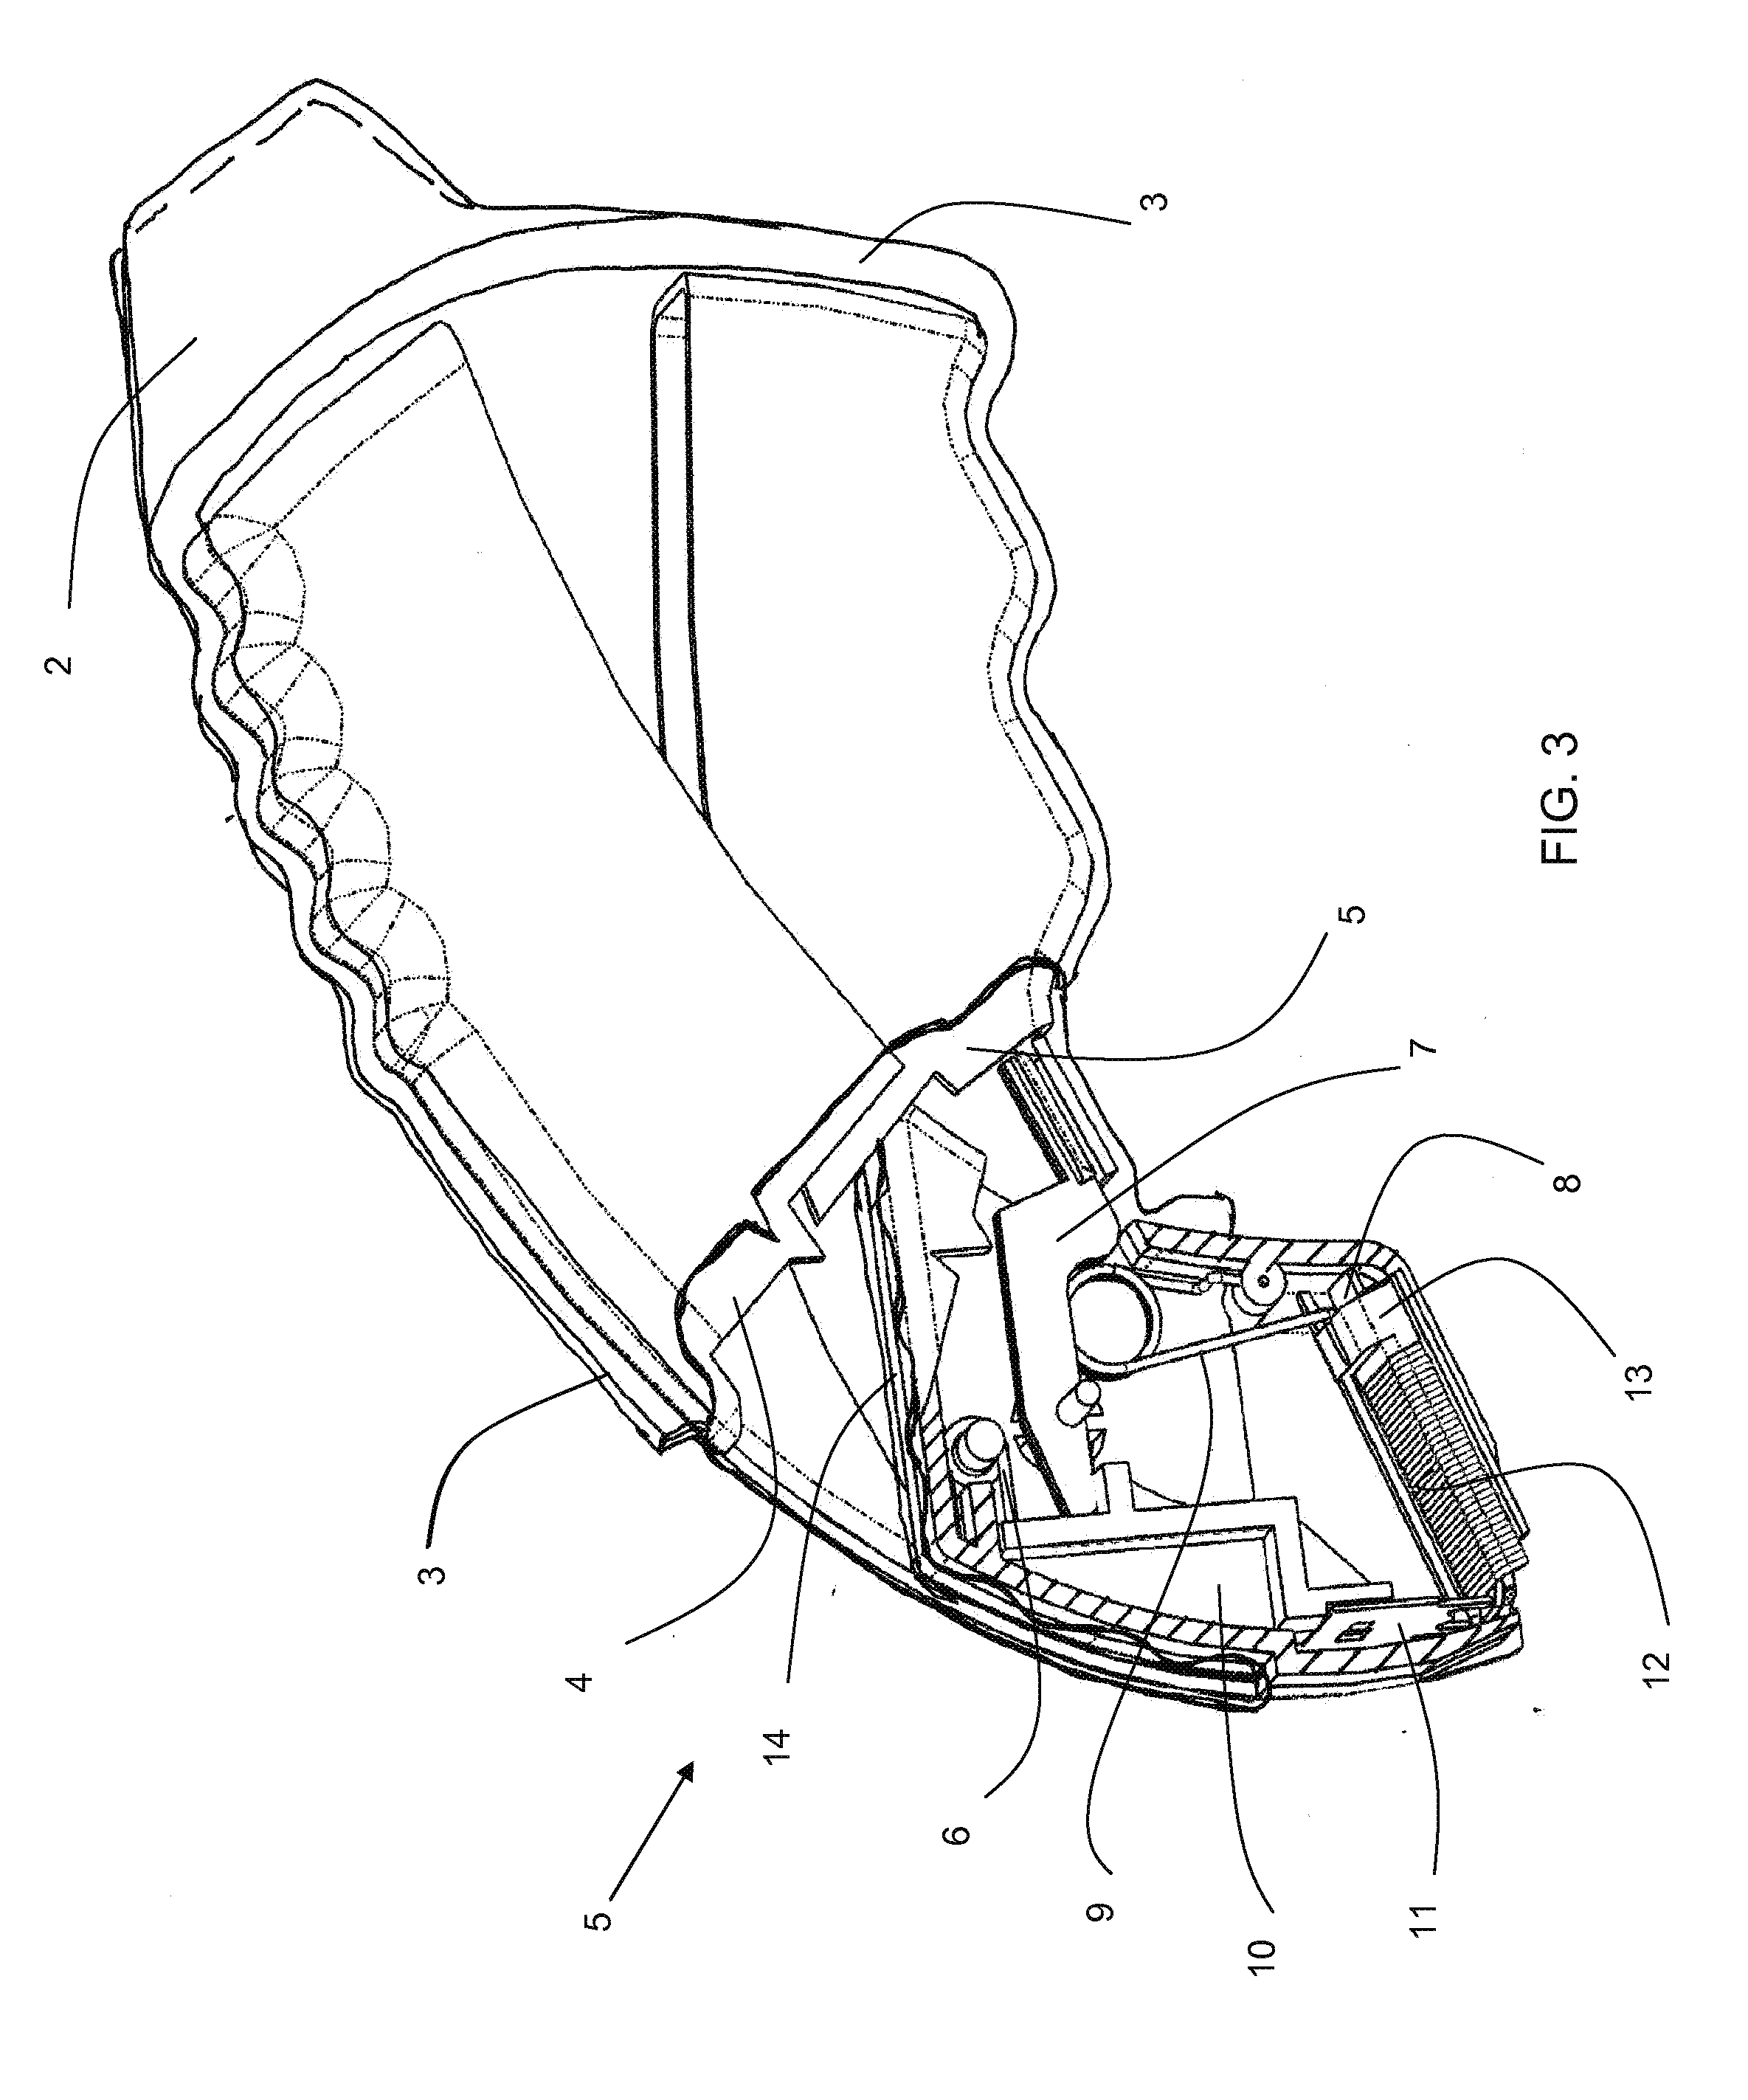 Skin Stapler with Components Optimized for Construction with Plant Based Materials